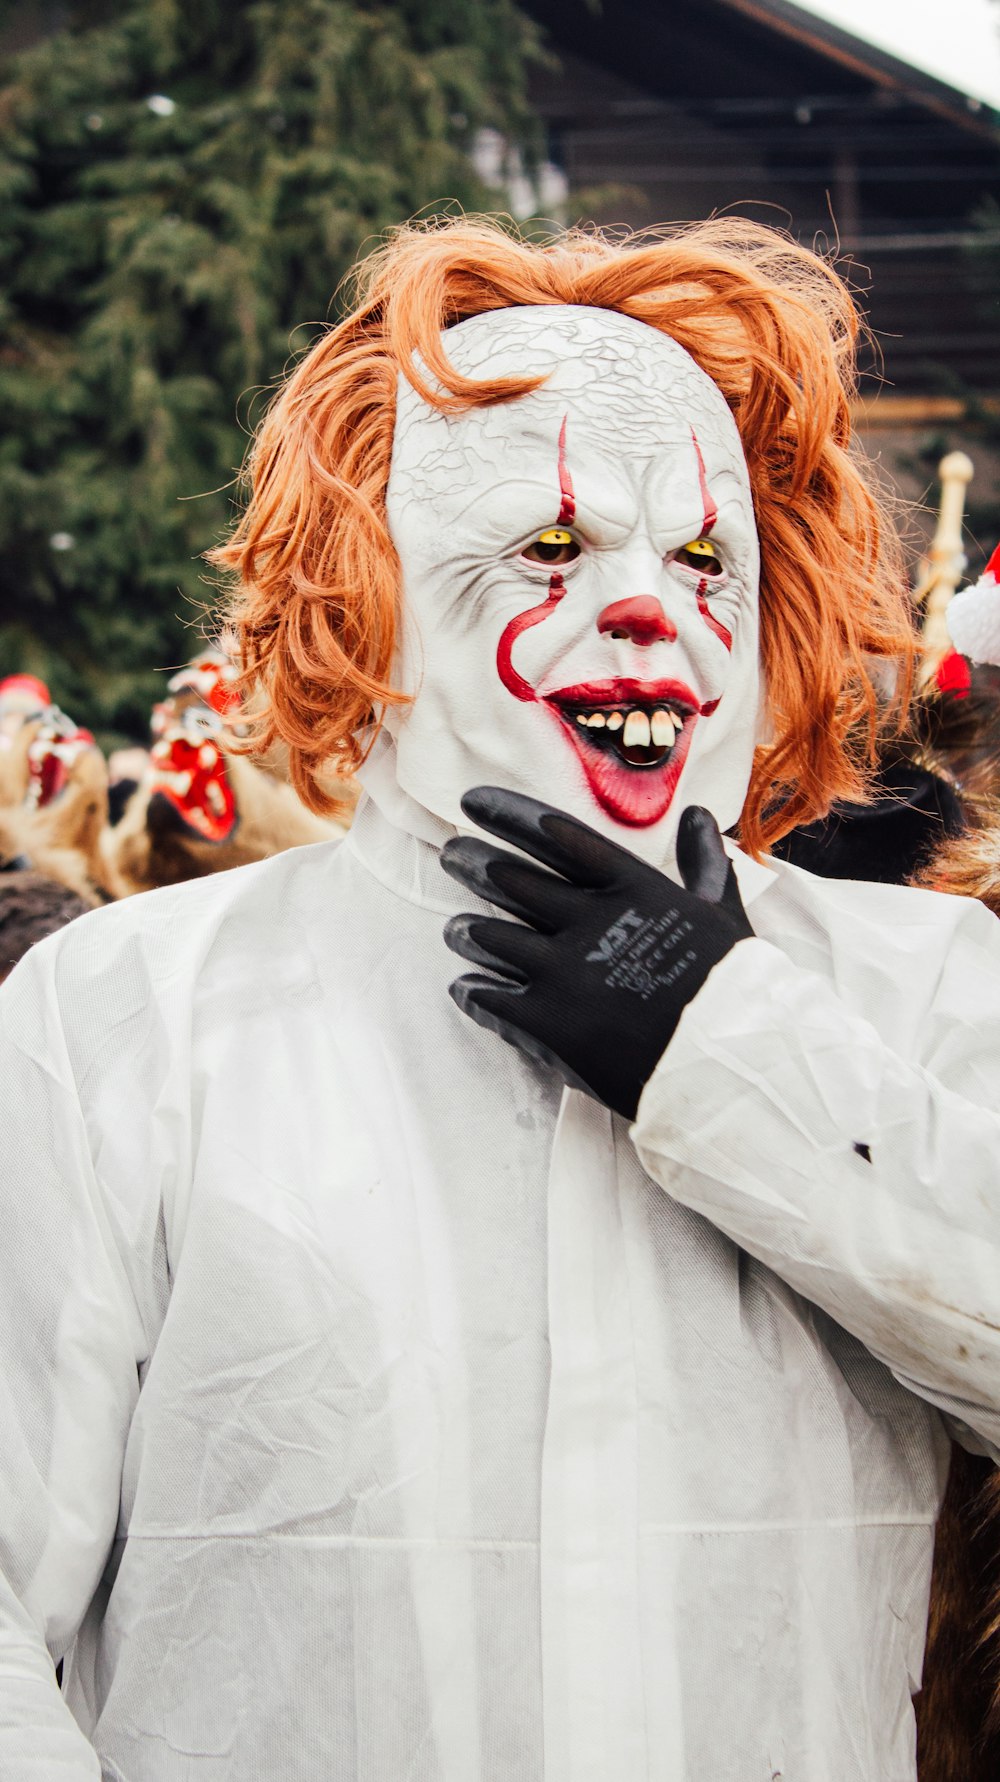 a man dressed as a clown with red hair and makeup